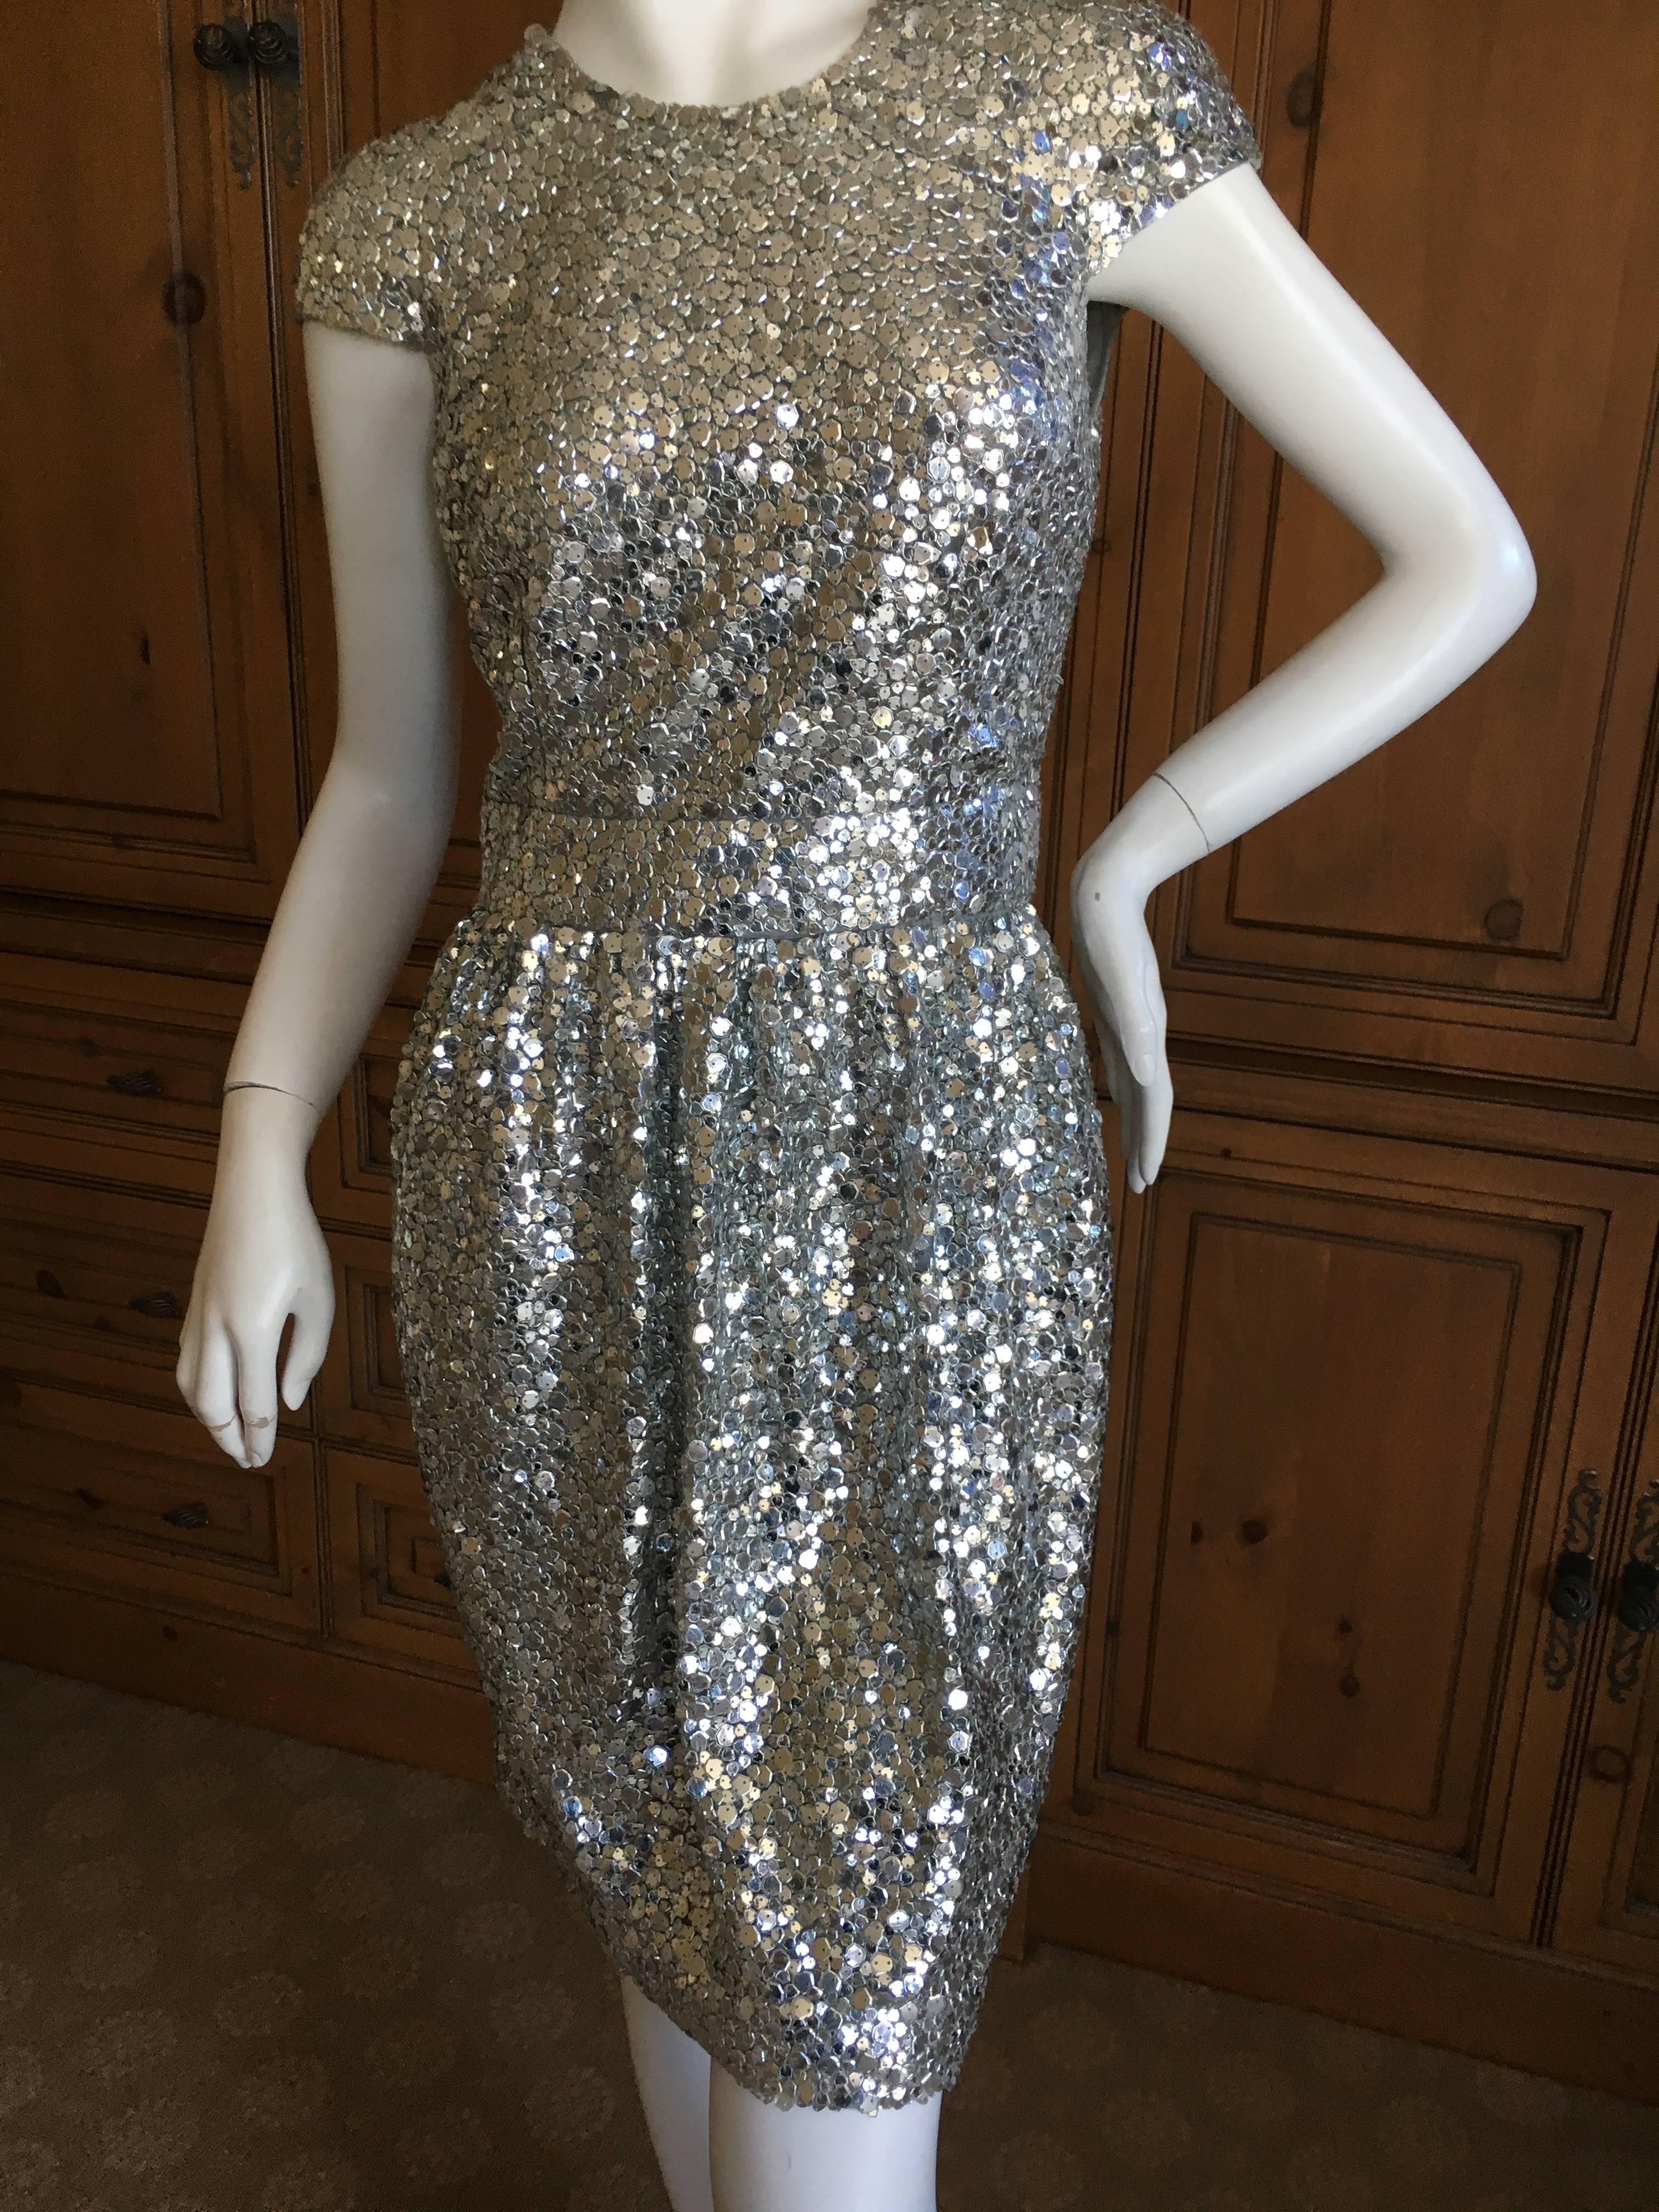 Sweet Silver Sequin Cap Sleeve Cocktail Dress from Naeem Khan.
Lined in silk, the size tag is no longer on the dress, it is a size 2
Bust 34